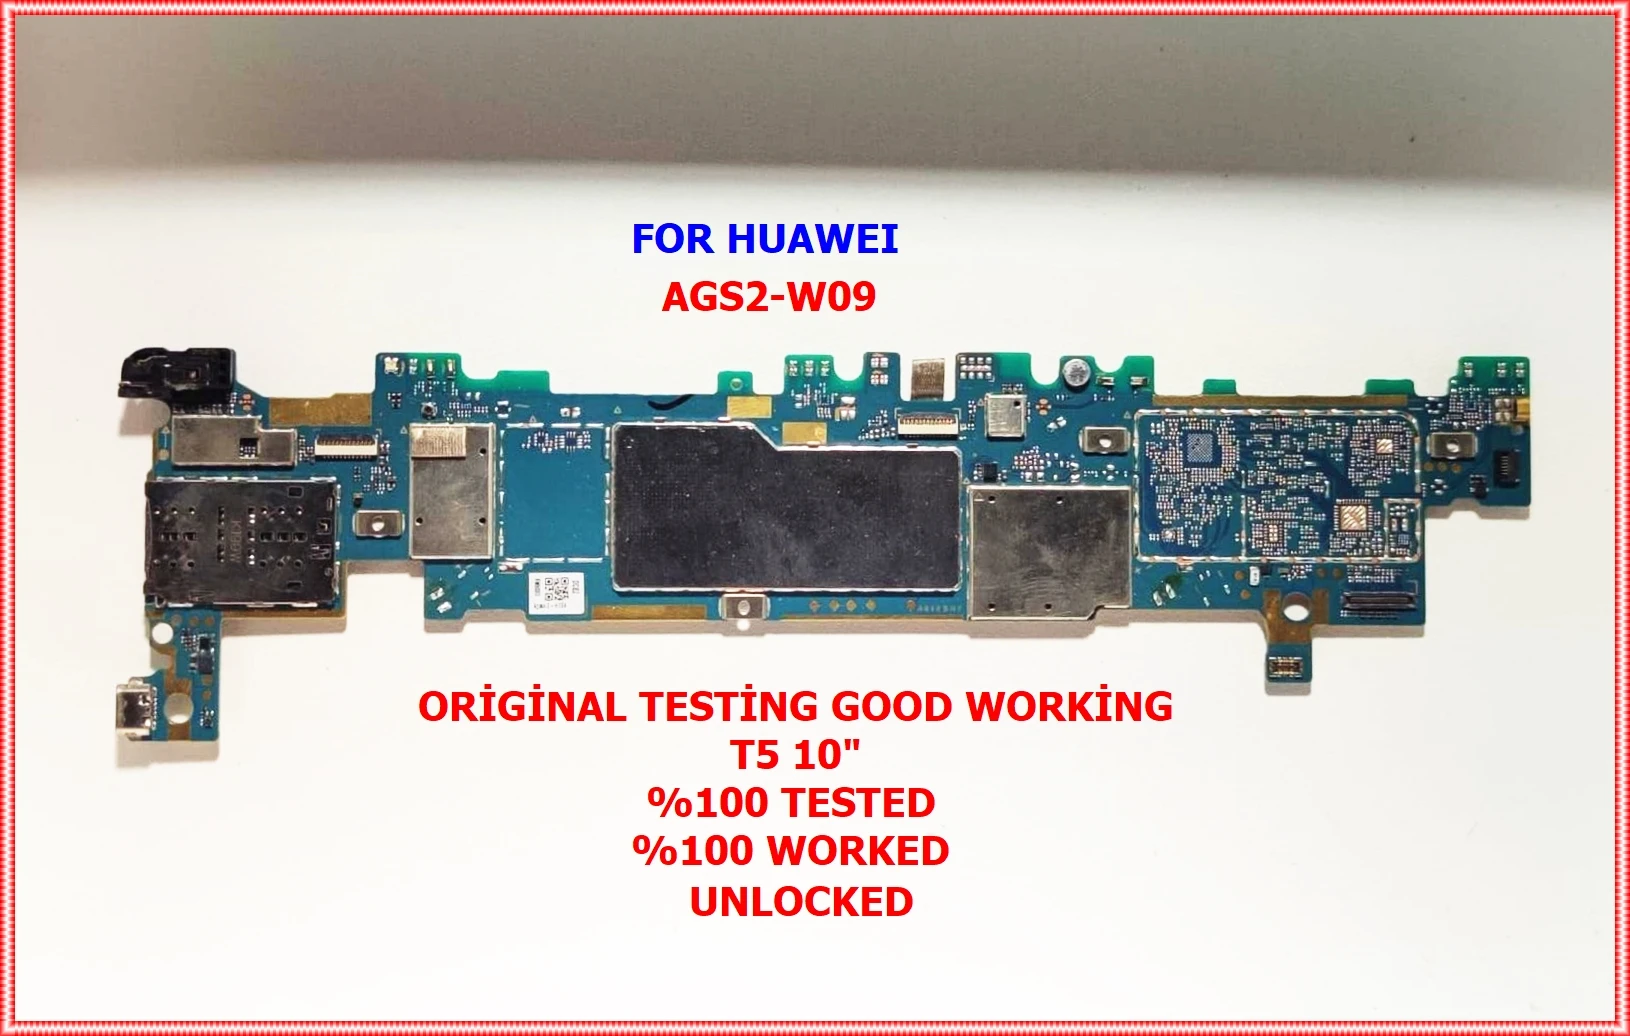 

For HUAWEI T5 16 GB AGS2-W09 MOTHERBOARD unlocked were tested and proved successful assembly meat and ready to use